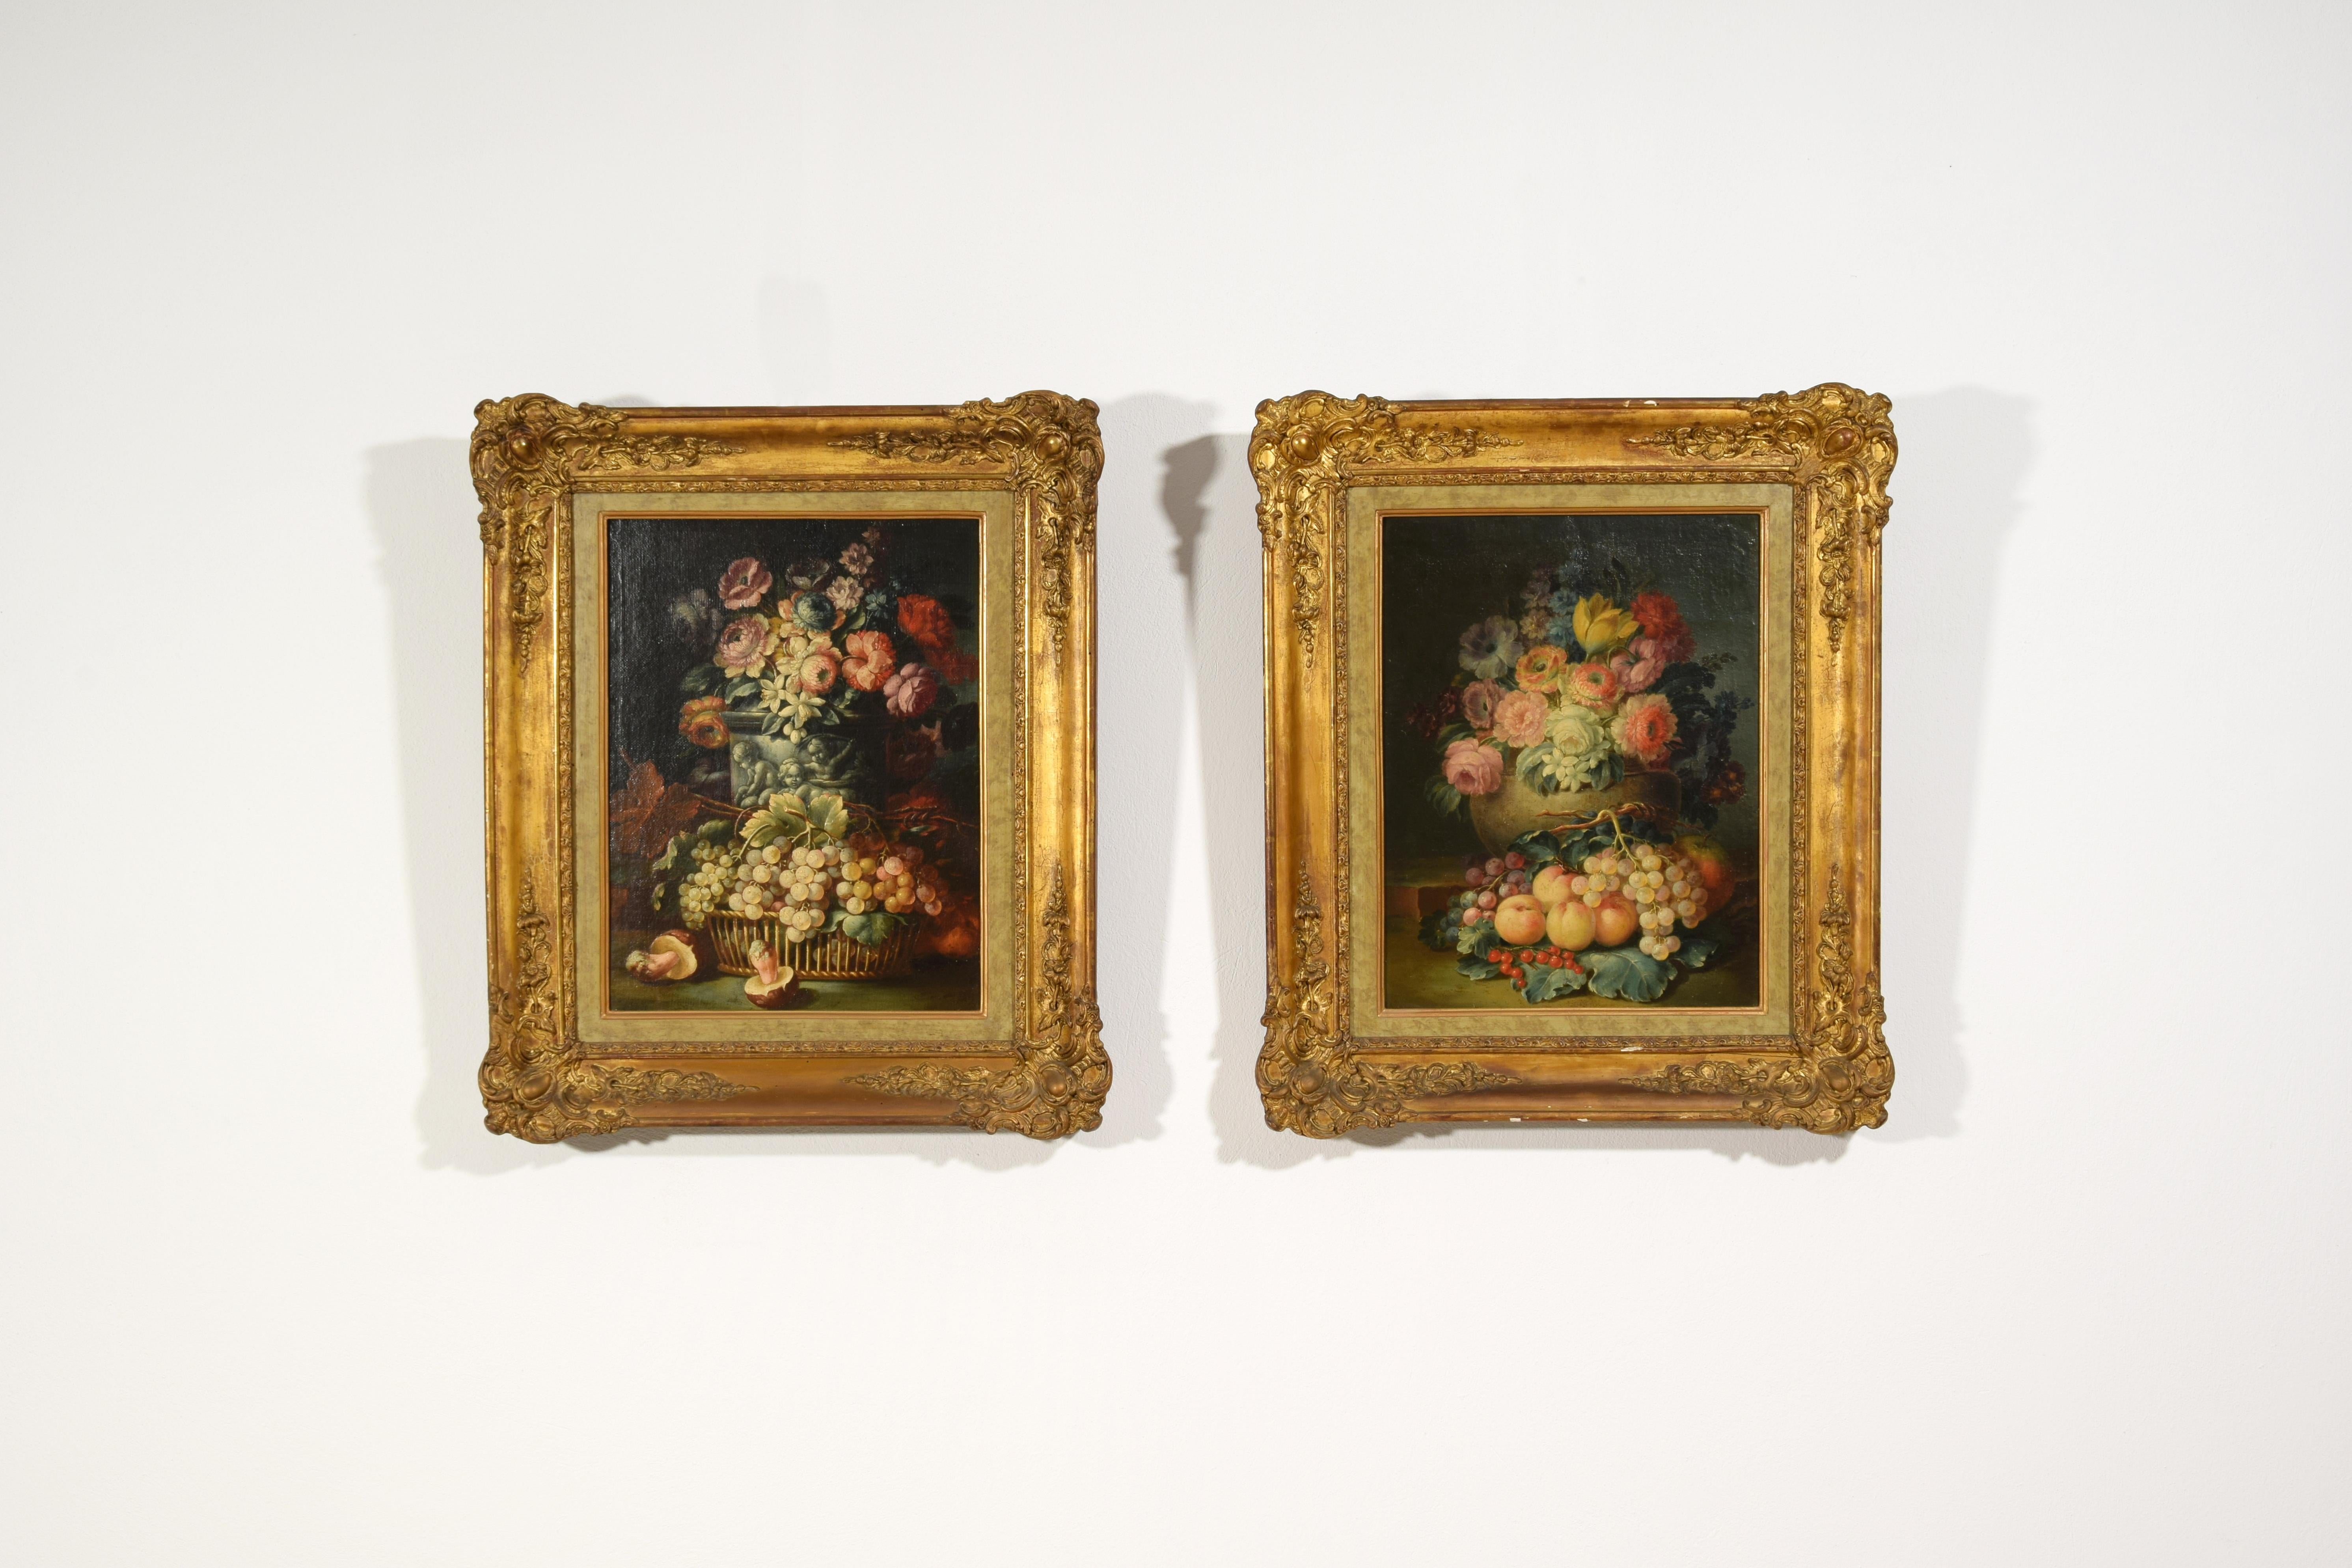 Rococo 18th Century, Two Still Lifes with Flowers and Fruits by Italian Paintings For Sale